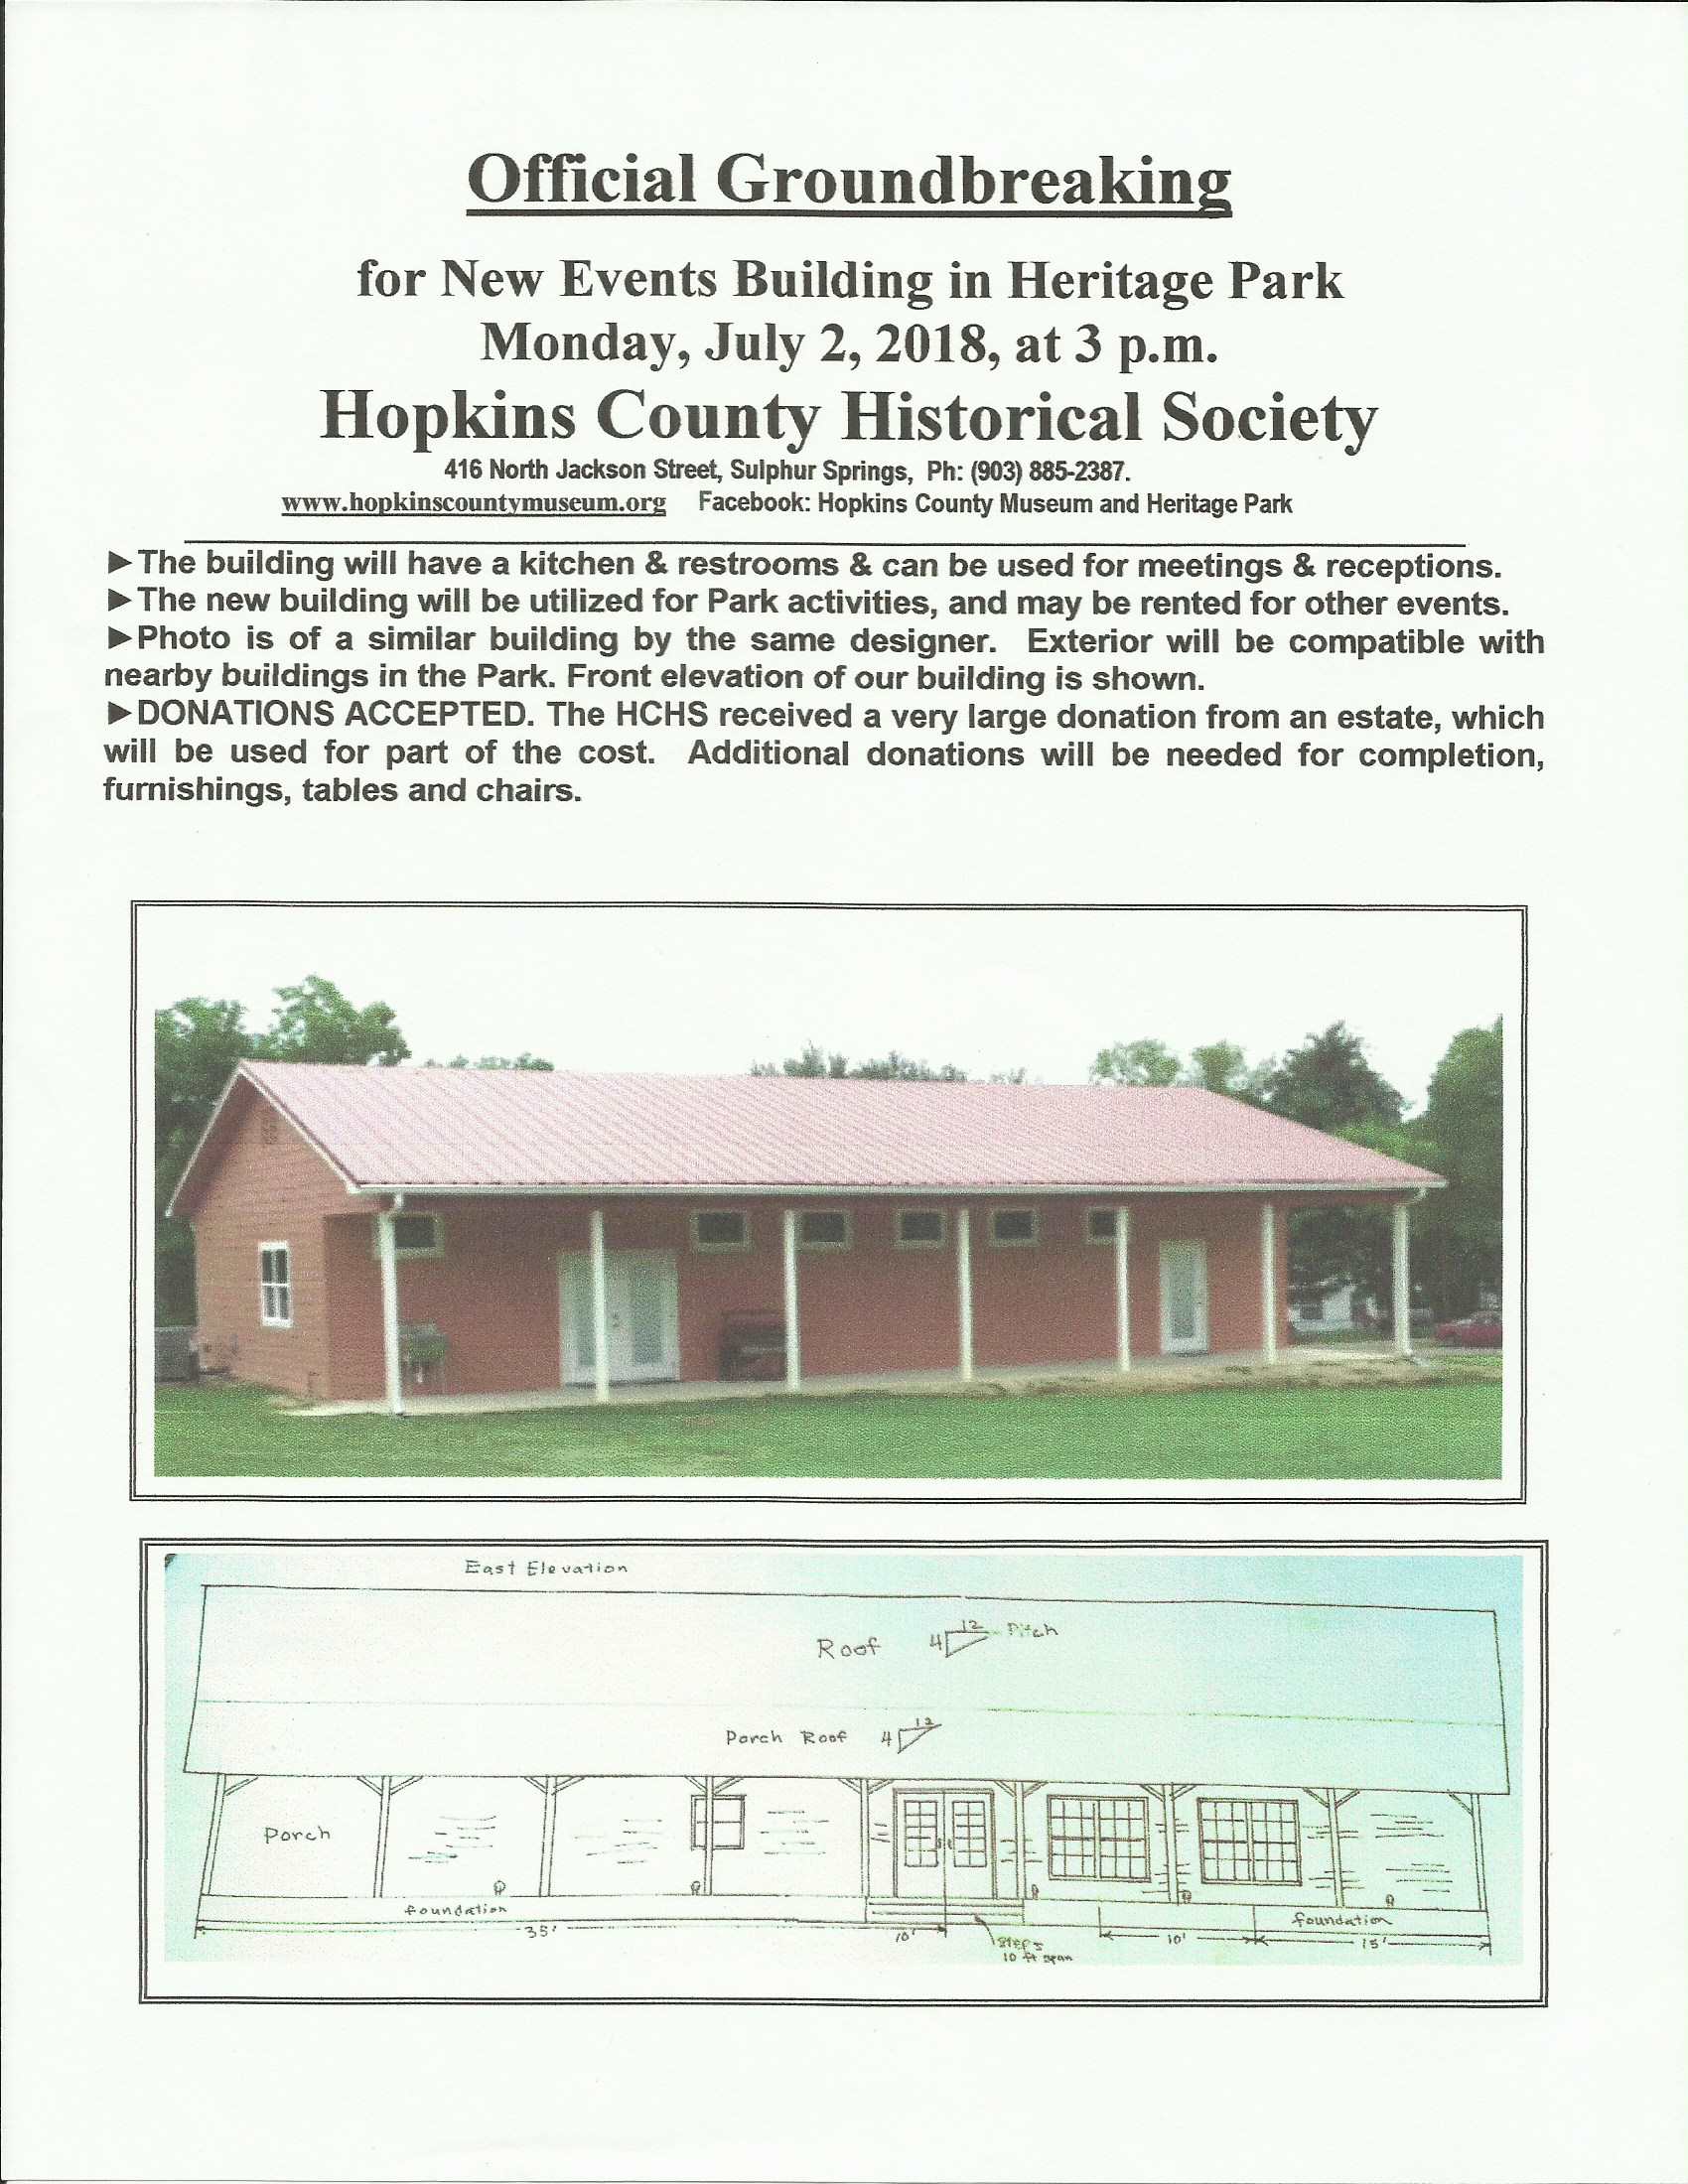 Official Groundbreaking for New Events Building in Heritage Park on Monday, July 2nd